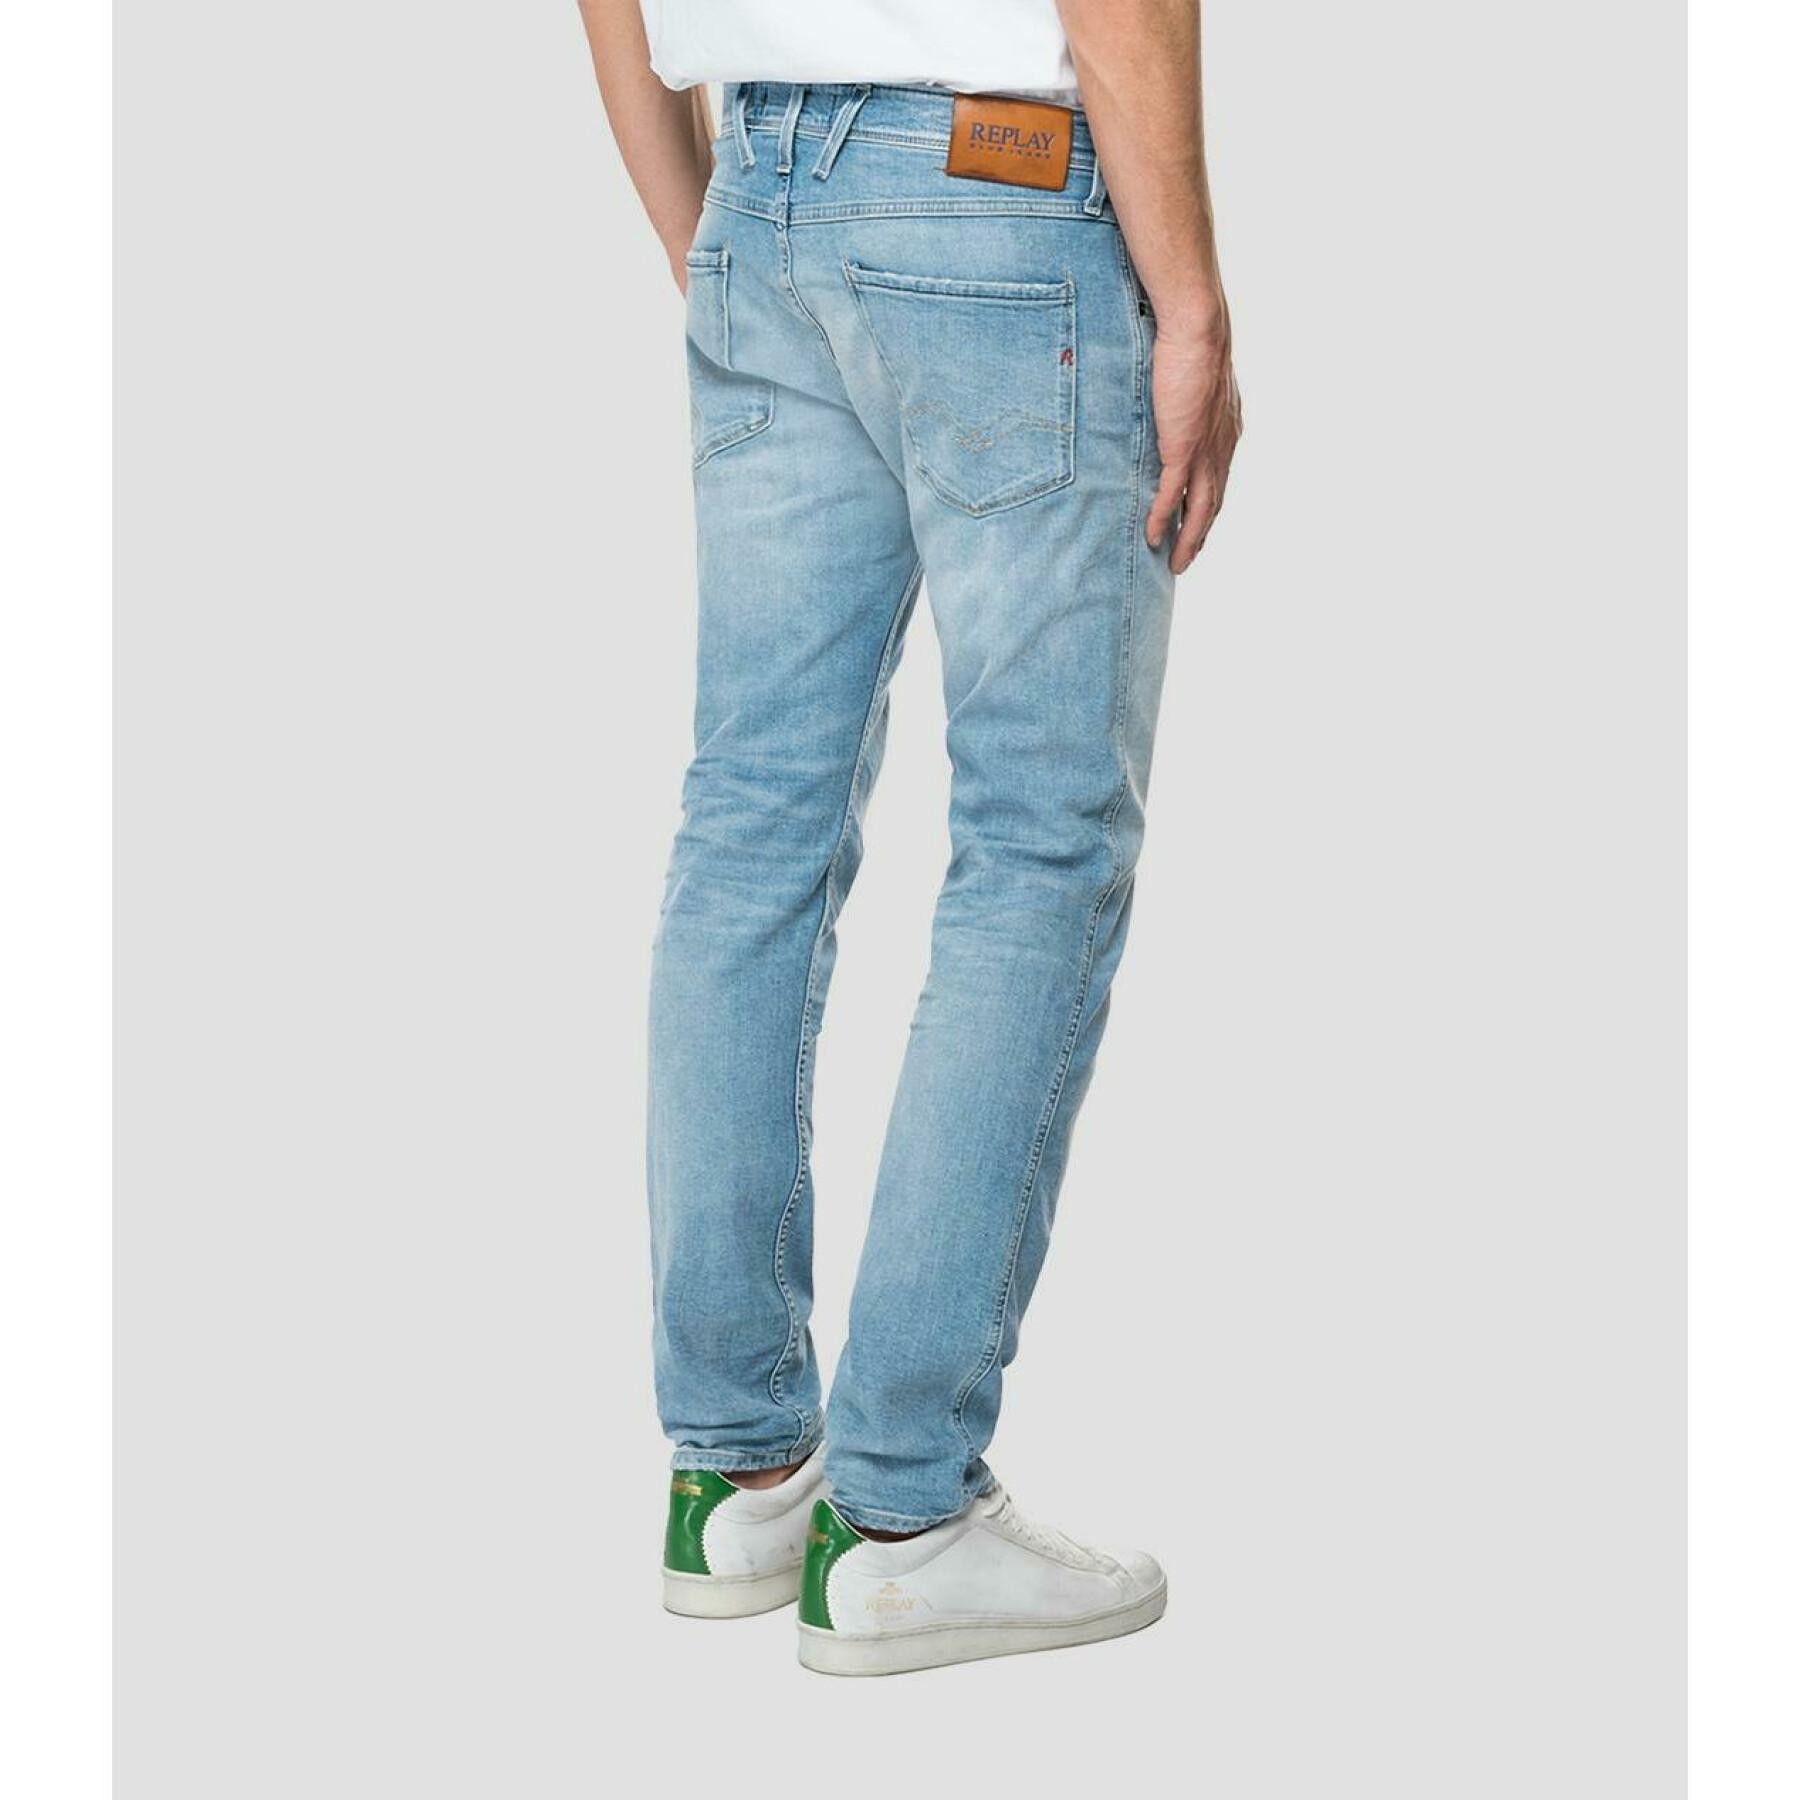 Slim fit jeans Replay anbass 573 bio